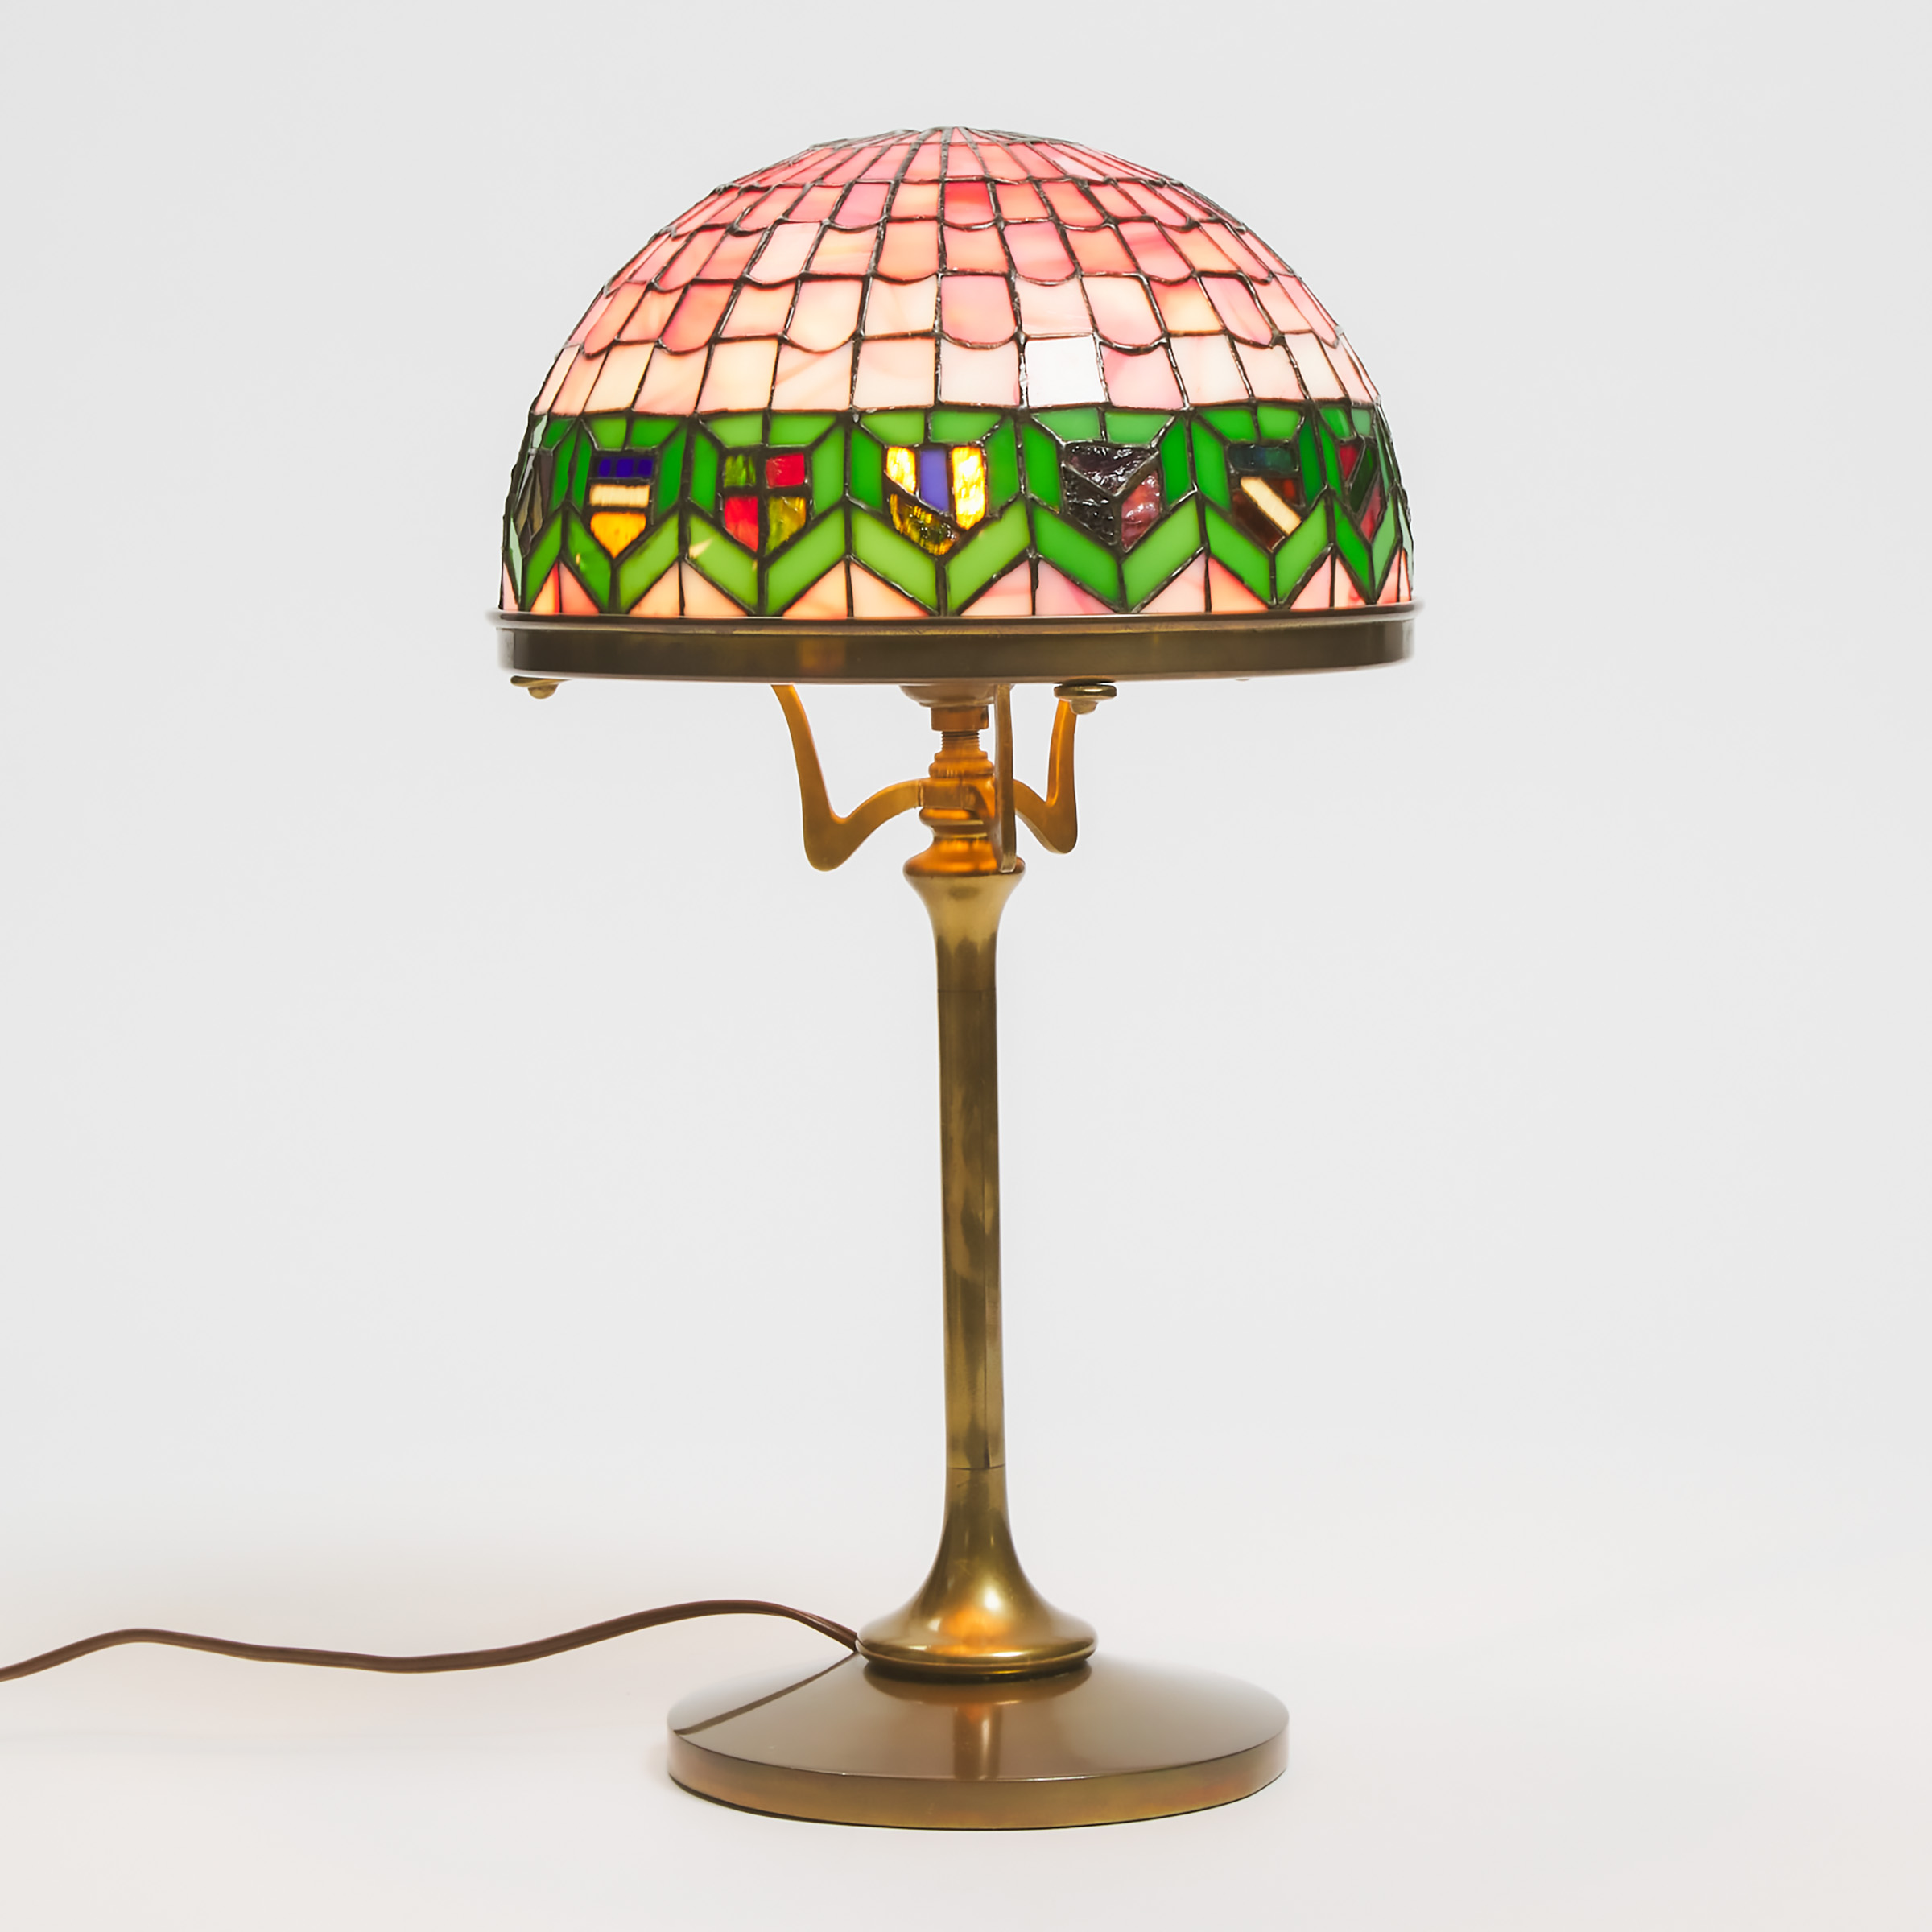 American Gilt Brass Table Lamp with Heraldic Leaded Mosaic Slag Glass Shade, early 20th century